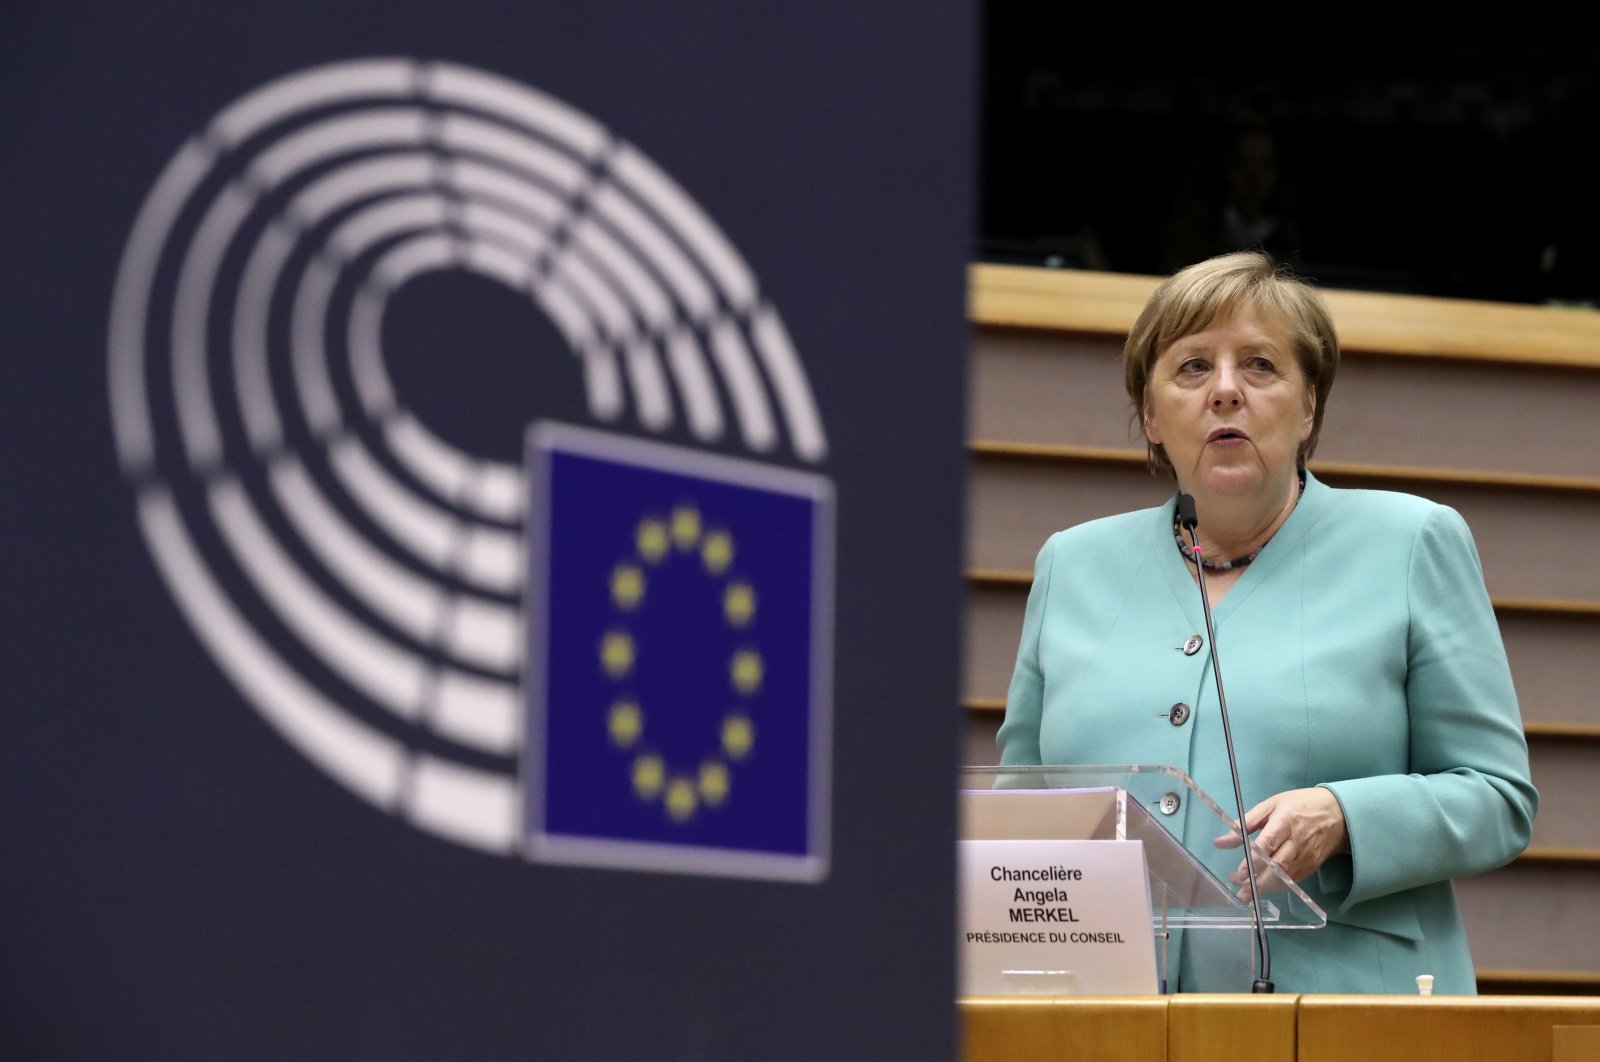 German Chancellor Angela Merkel addresses a plenary session at the European Parliament in Brussels, July 8, 2020. (AP Photo)